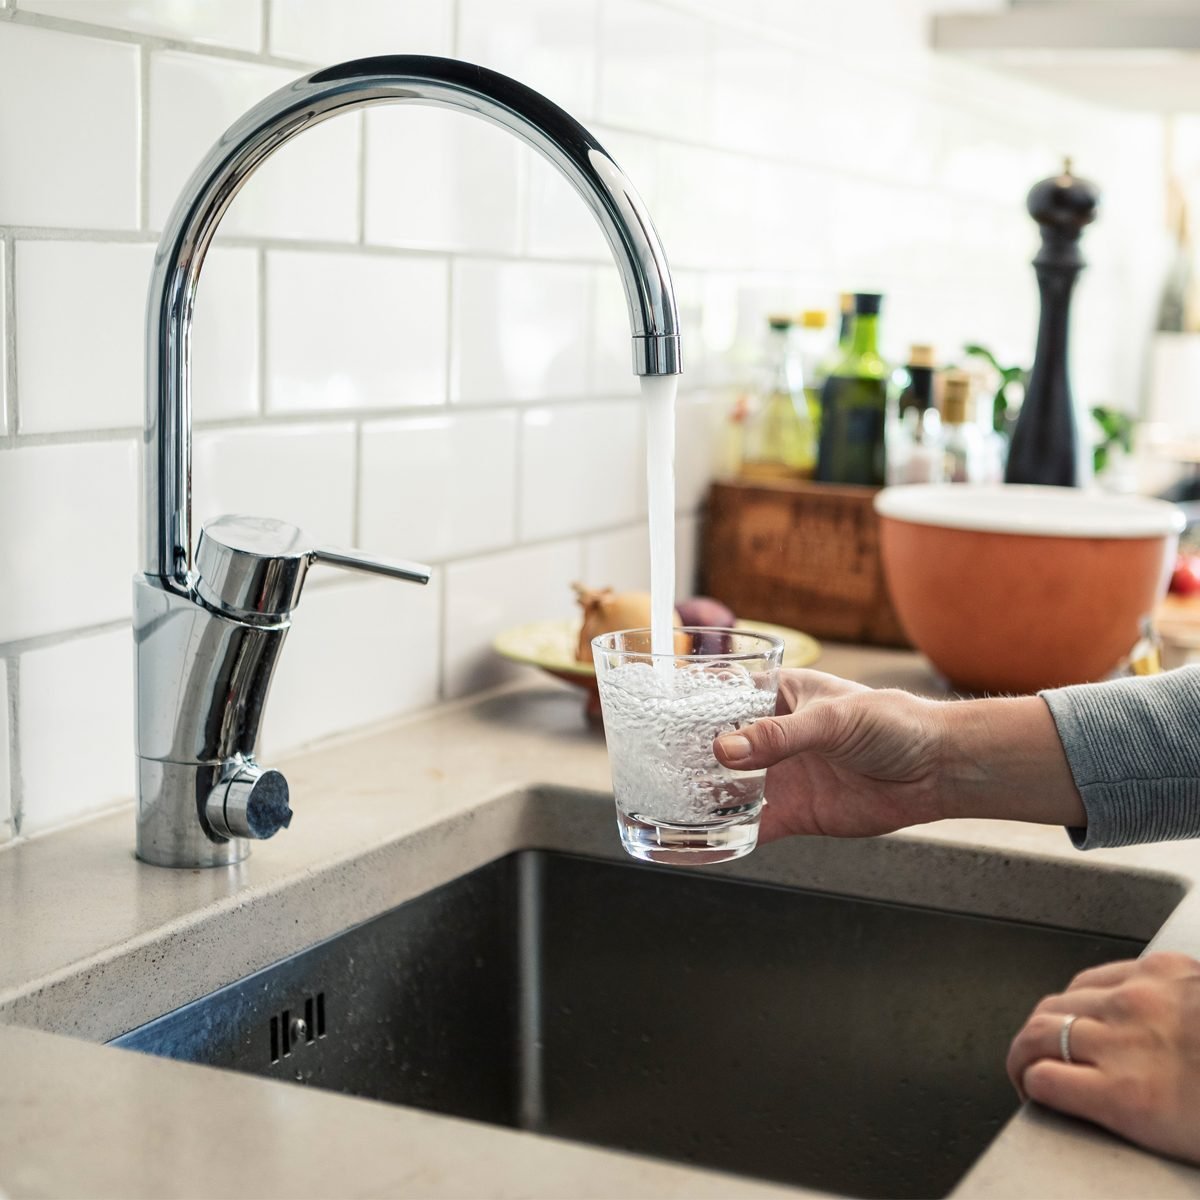 10 Well Water Filtration Systems for Contaminant-Free, Better-Tasting Water